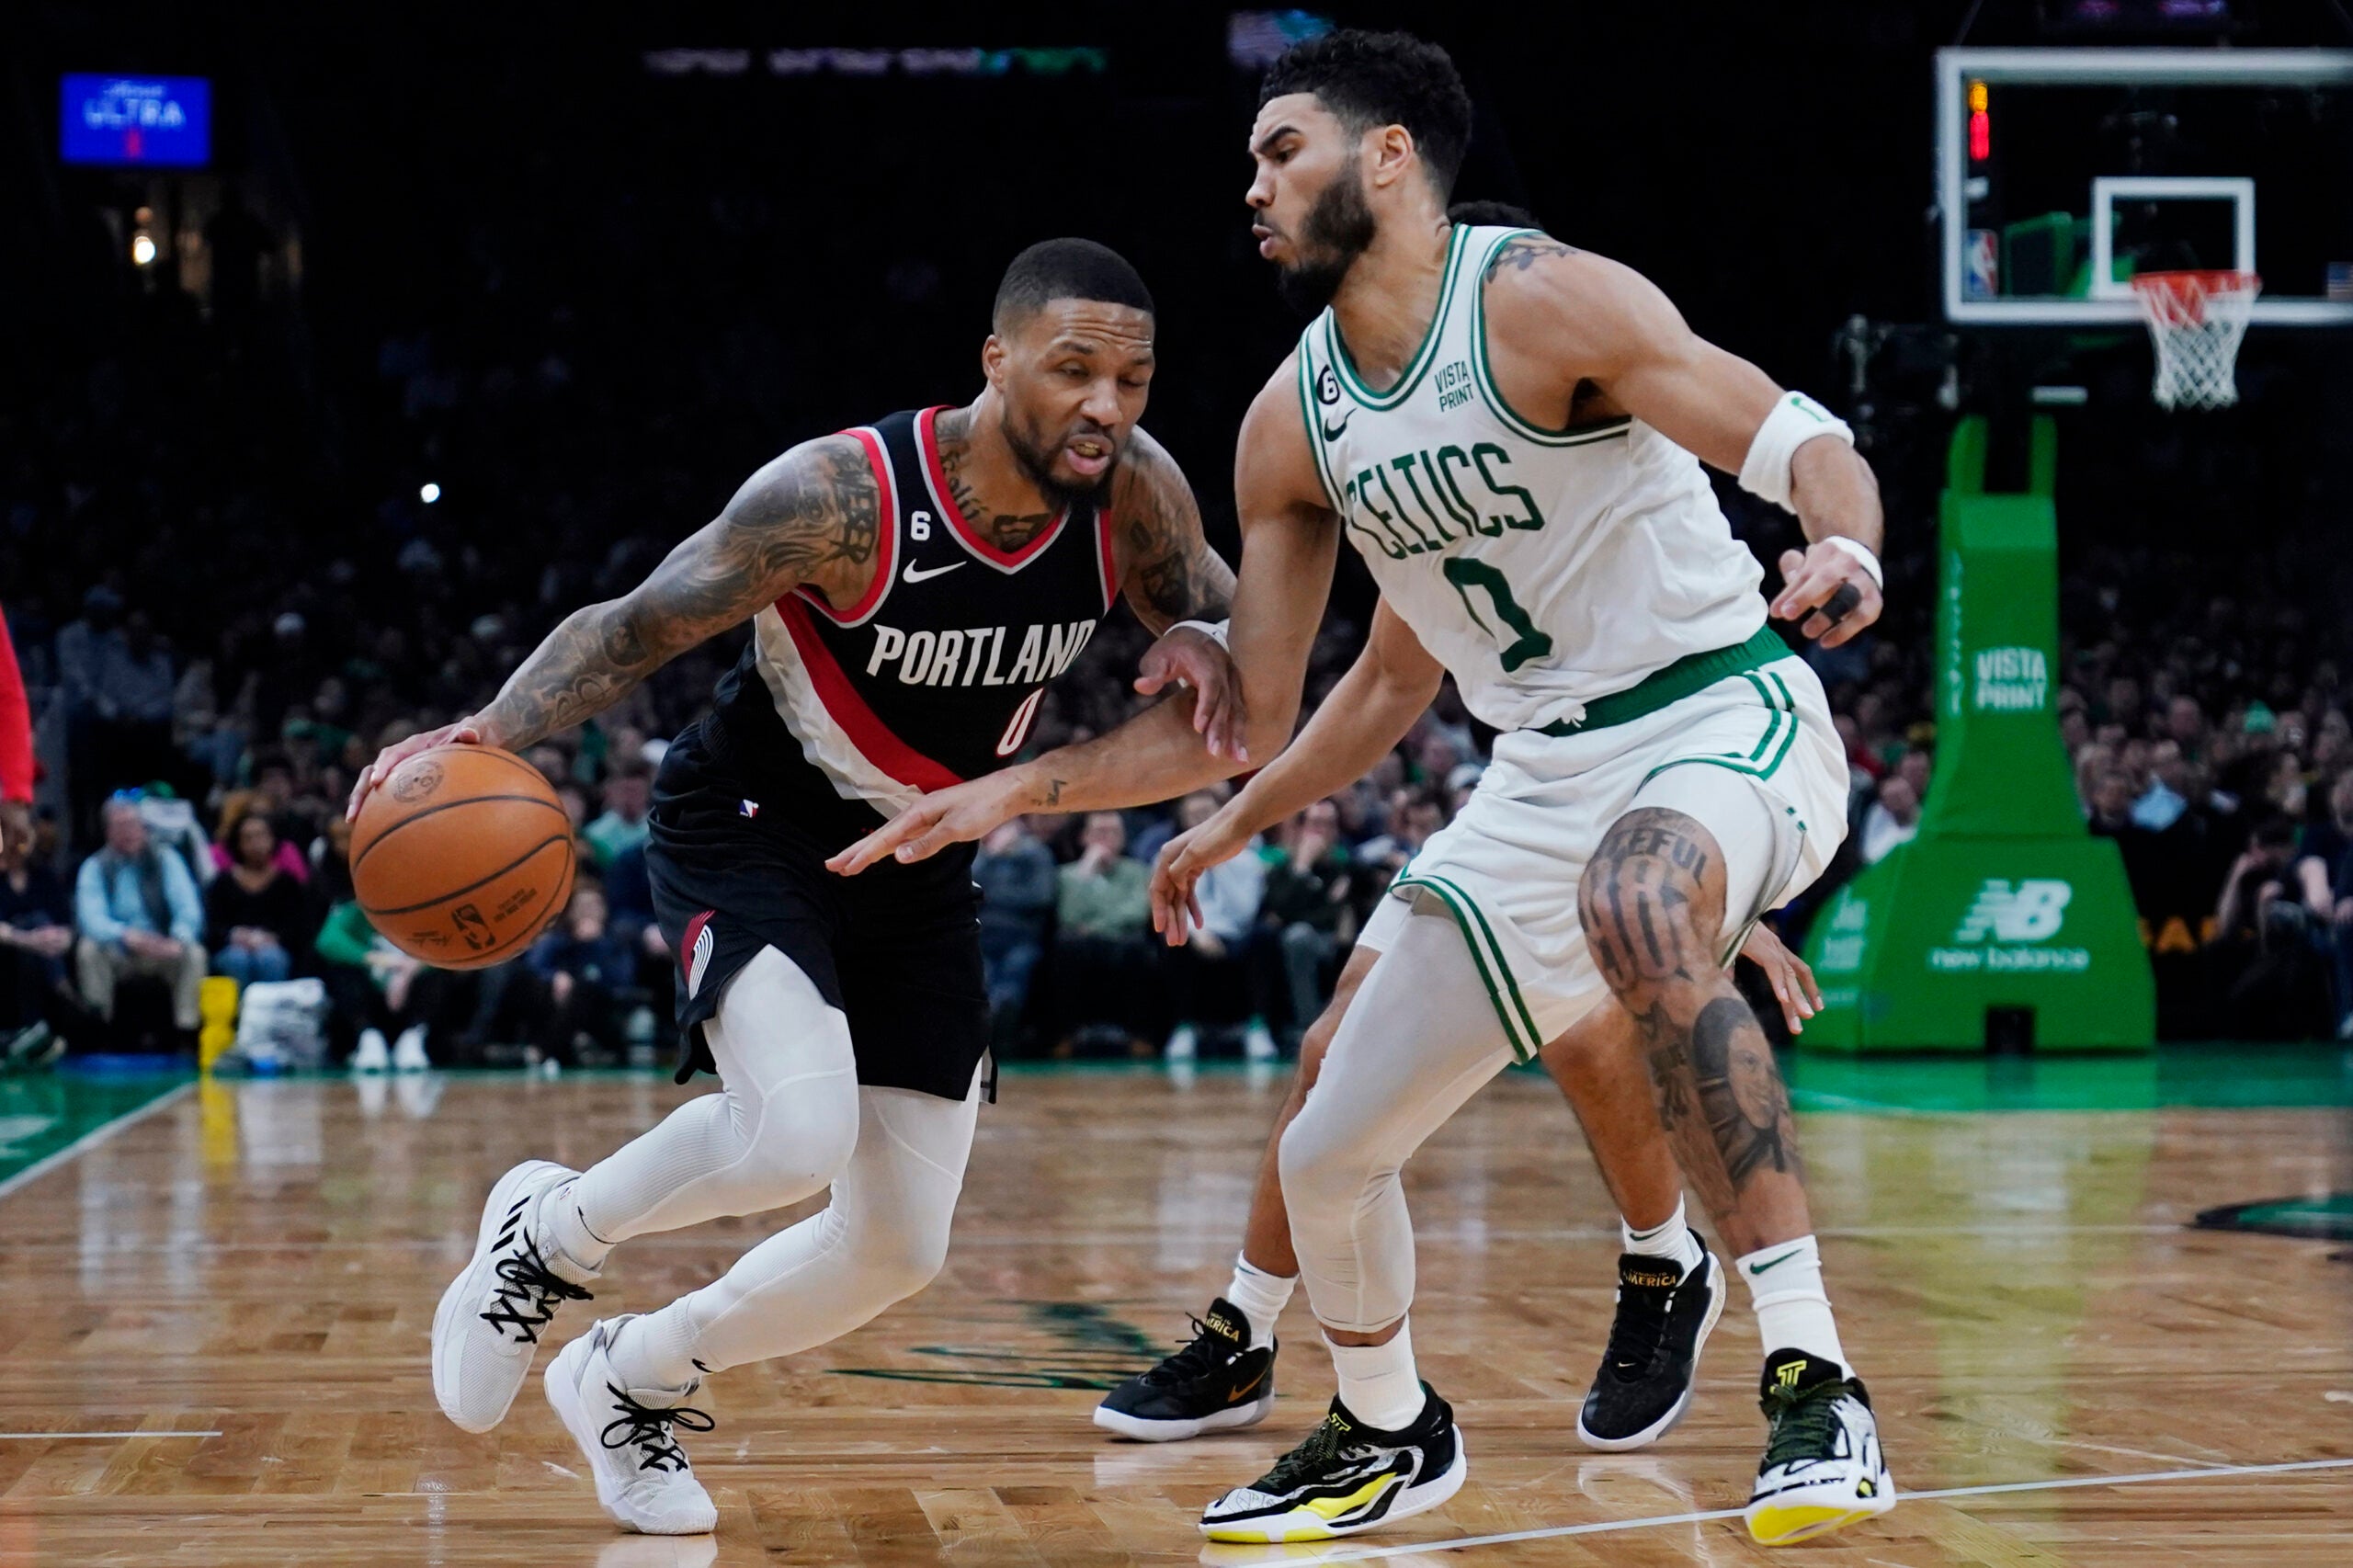 Damian Lillard drives to the basket against Jayson Tatum during a March 8, 2023 game in Boston.